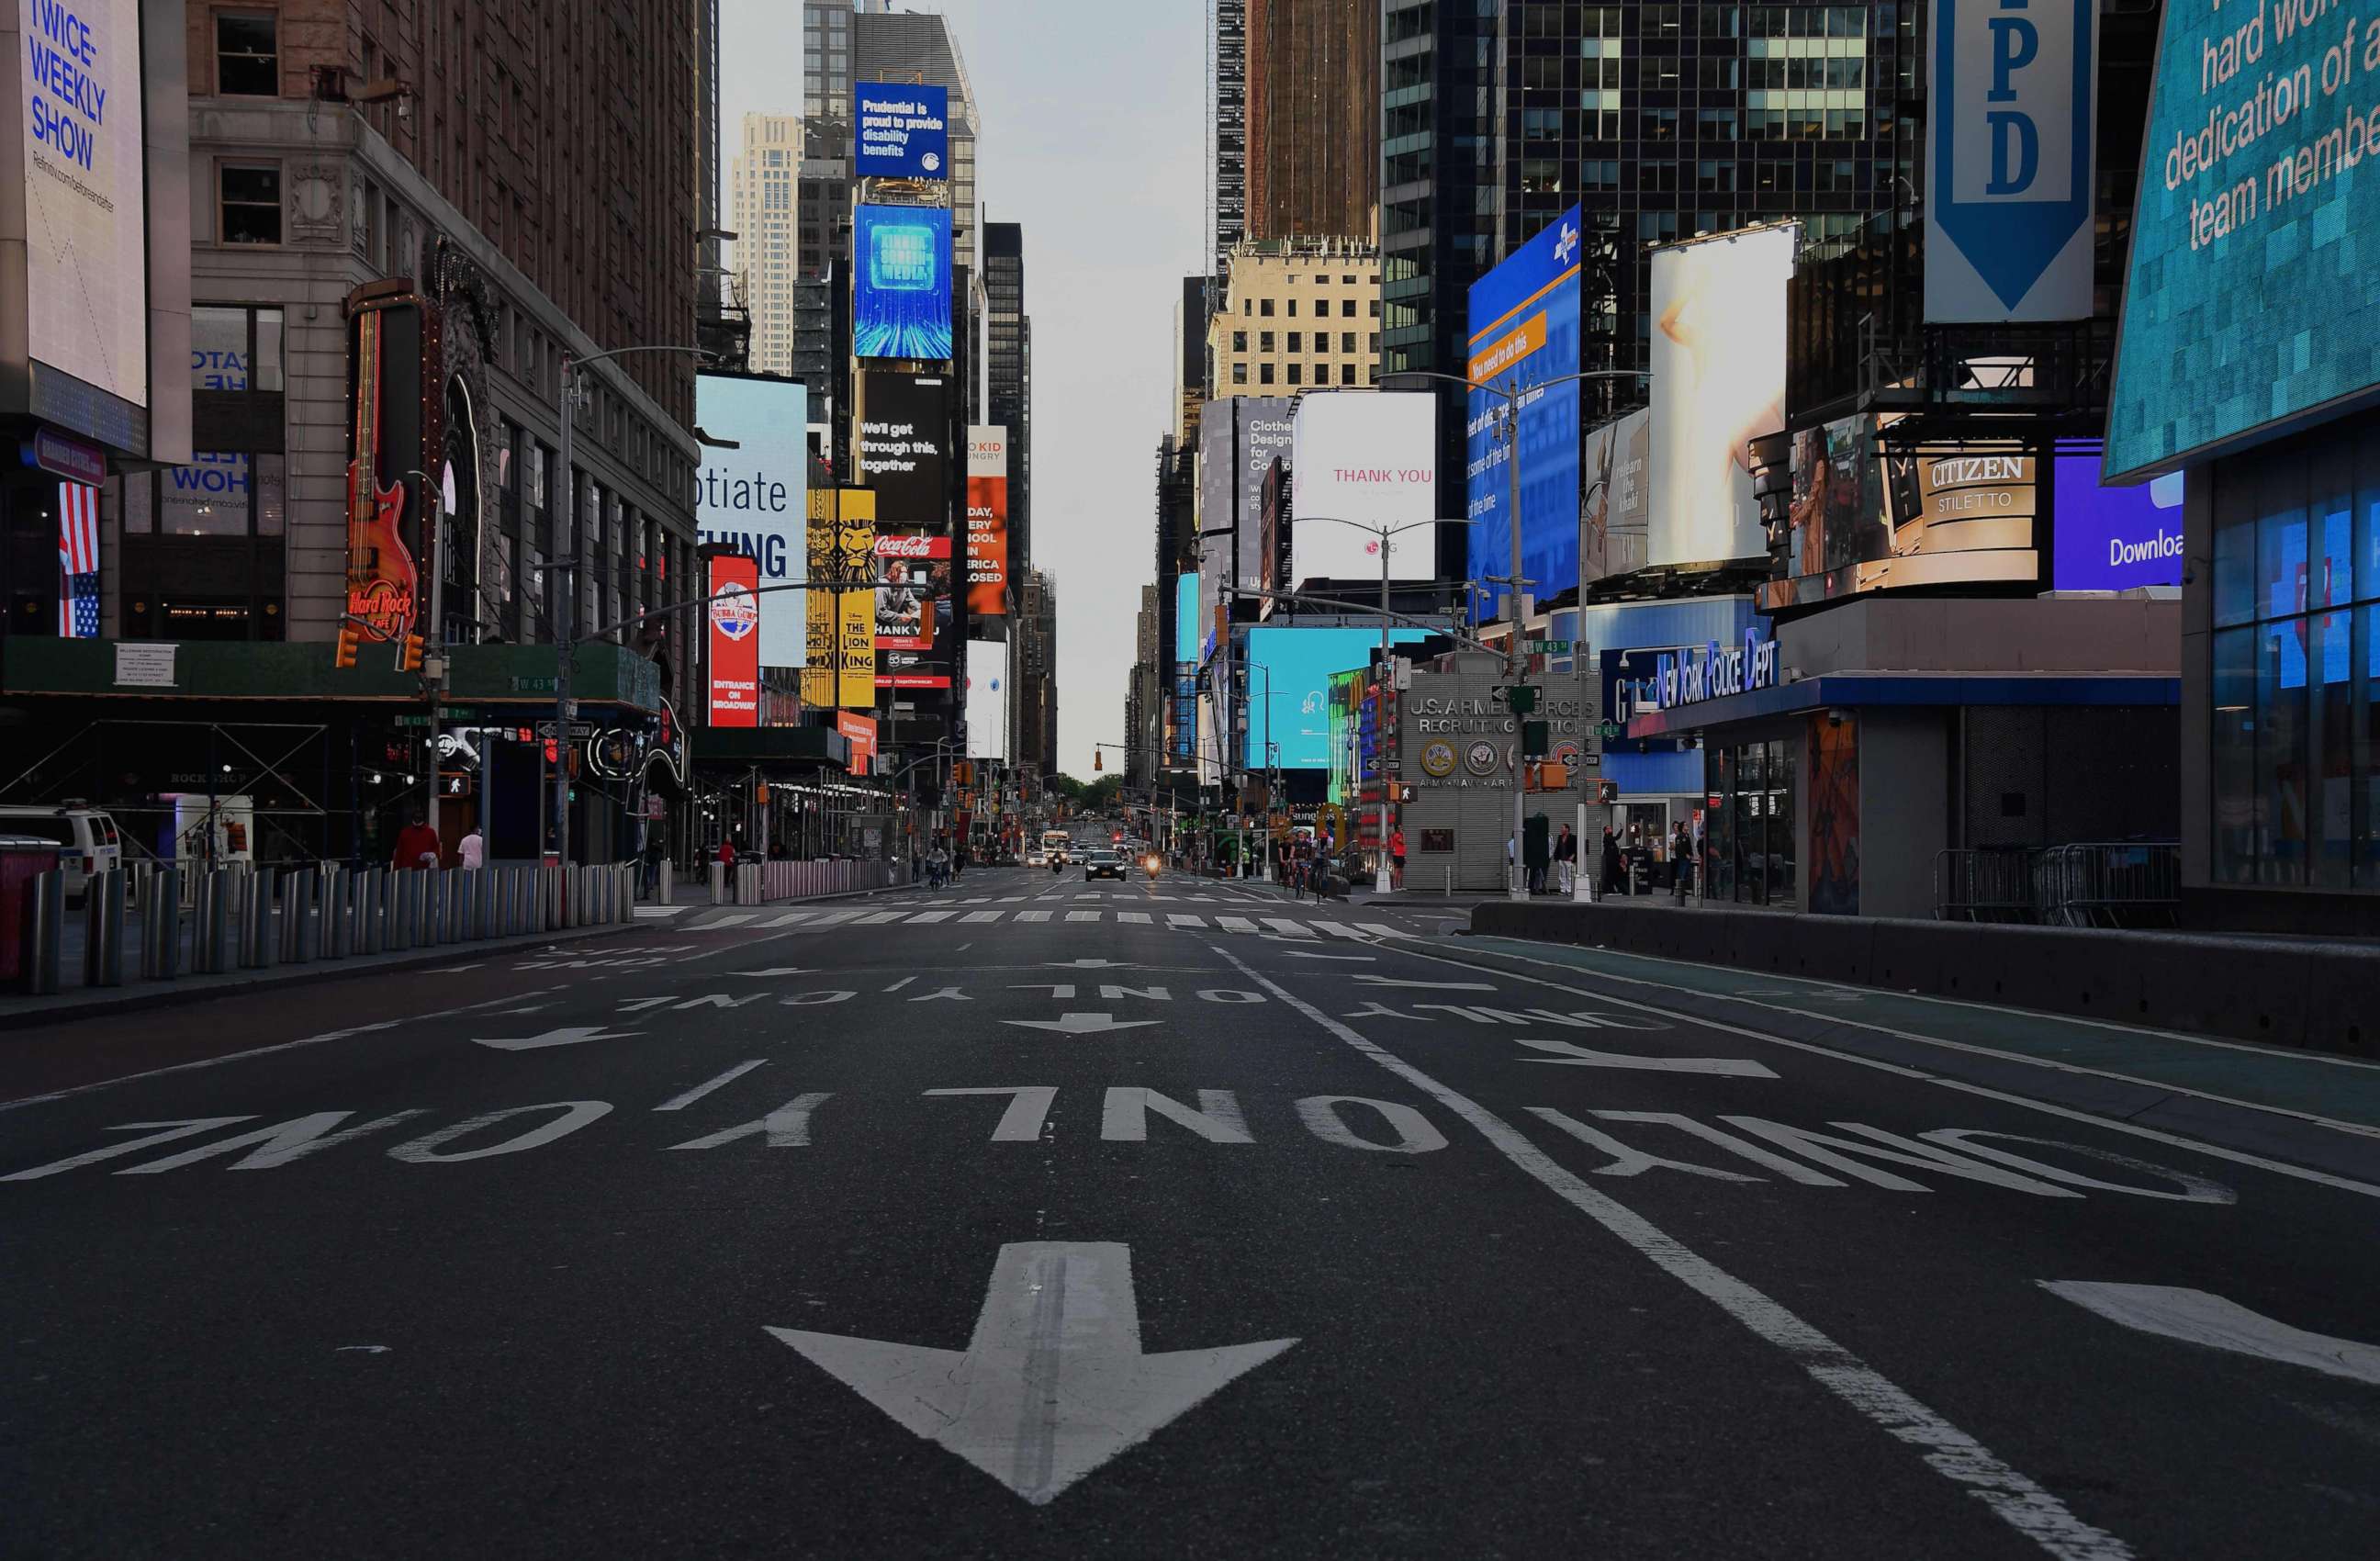 PHOTO: A car approaches on a nearly empty street near Times Square on May 27, 2020 in New York City.